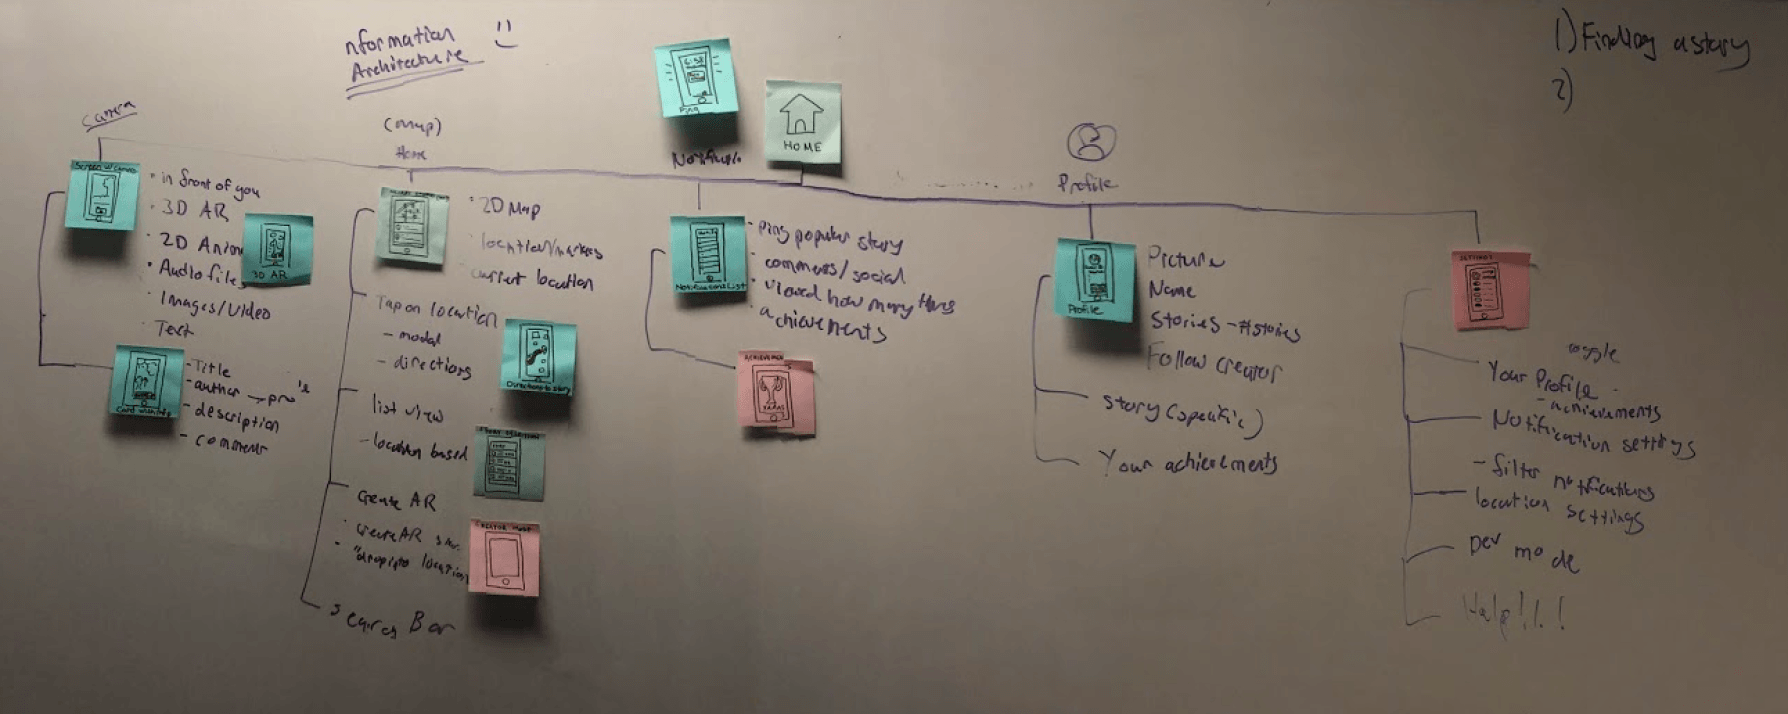 Information architecture of Xplore on a whiteboard